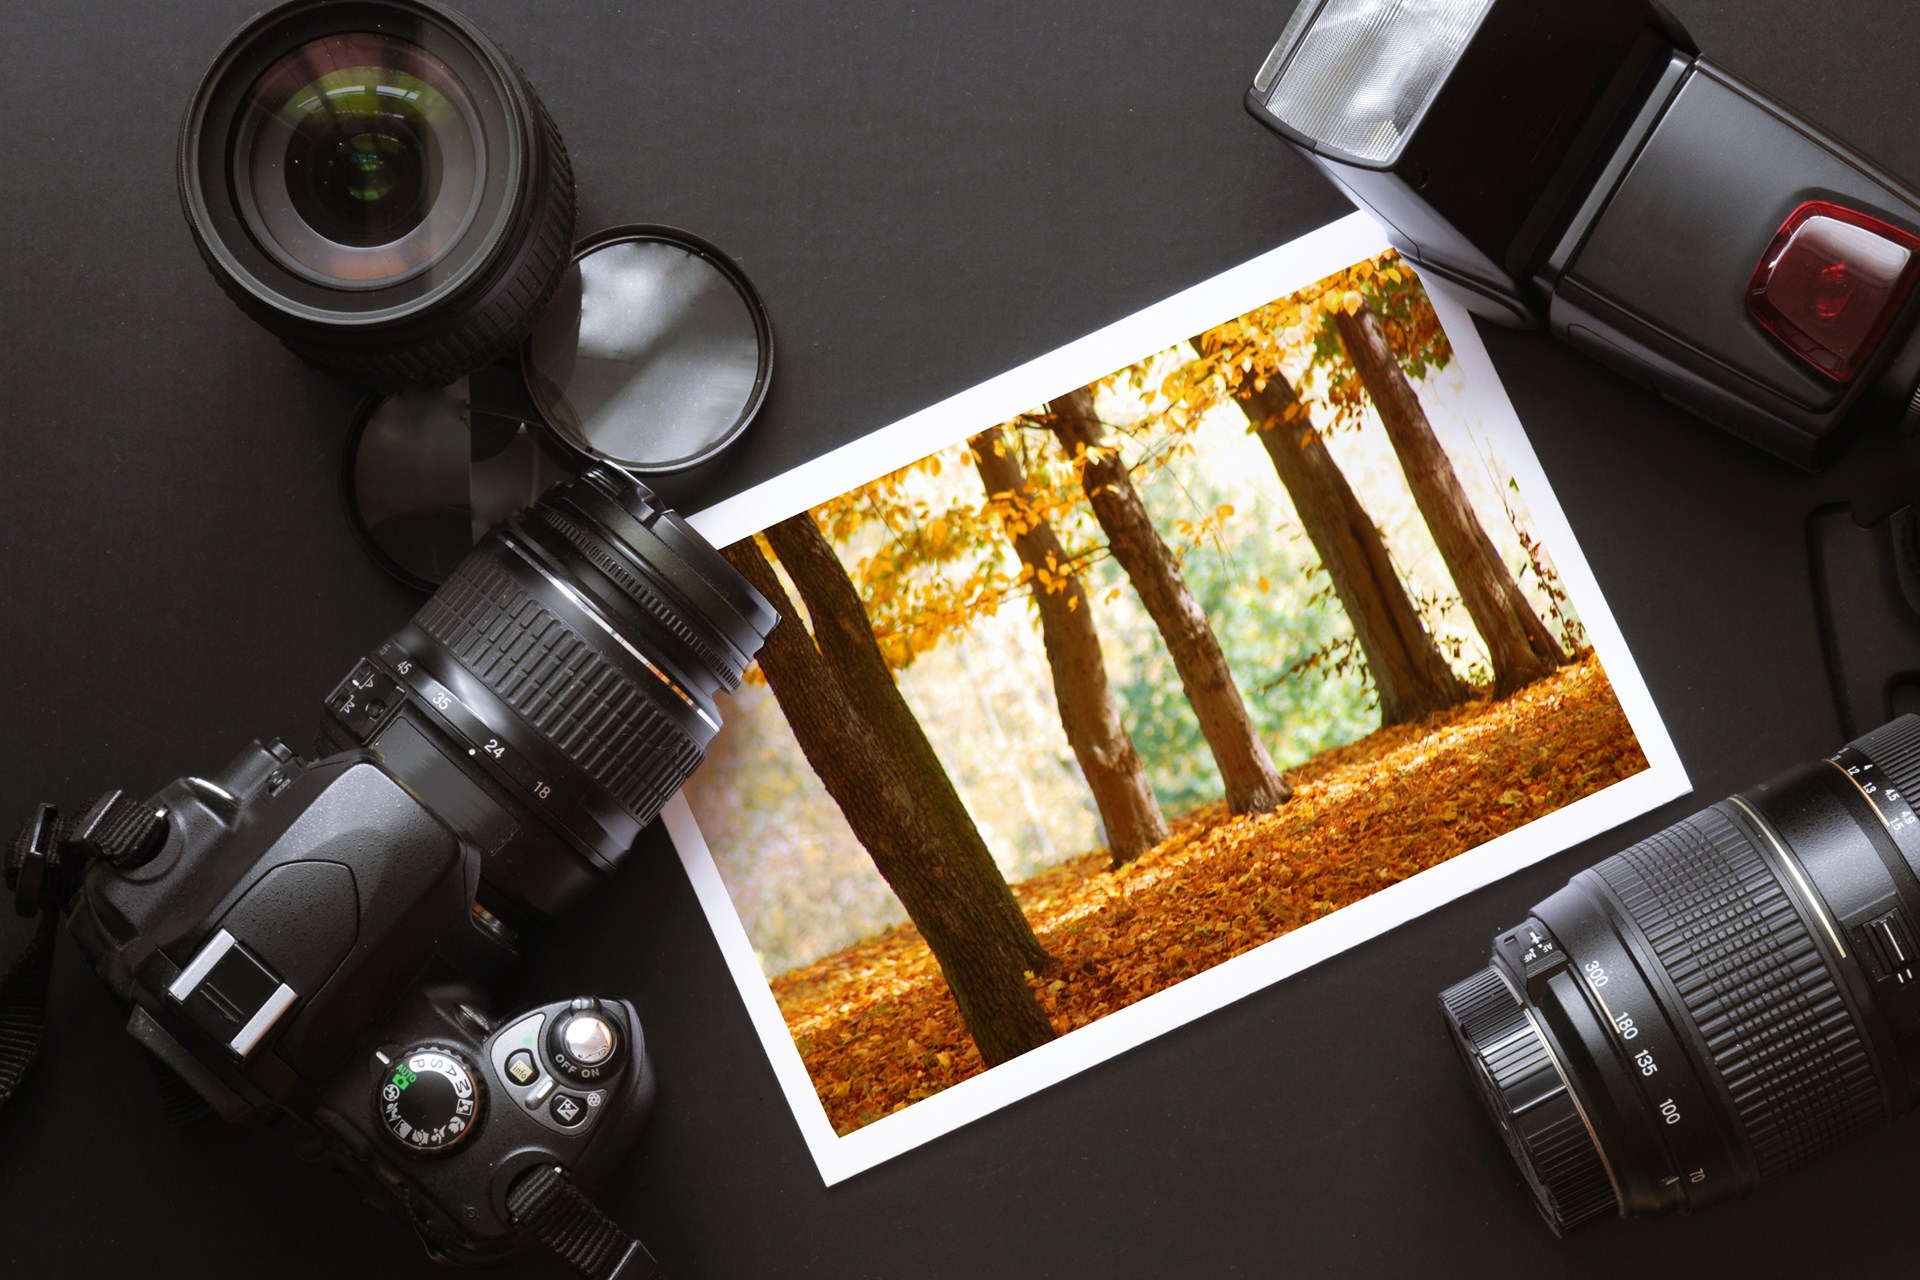 Info on Master’s Degree Programs in Digital Photography